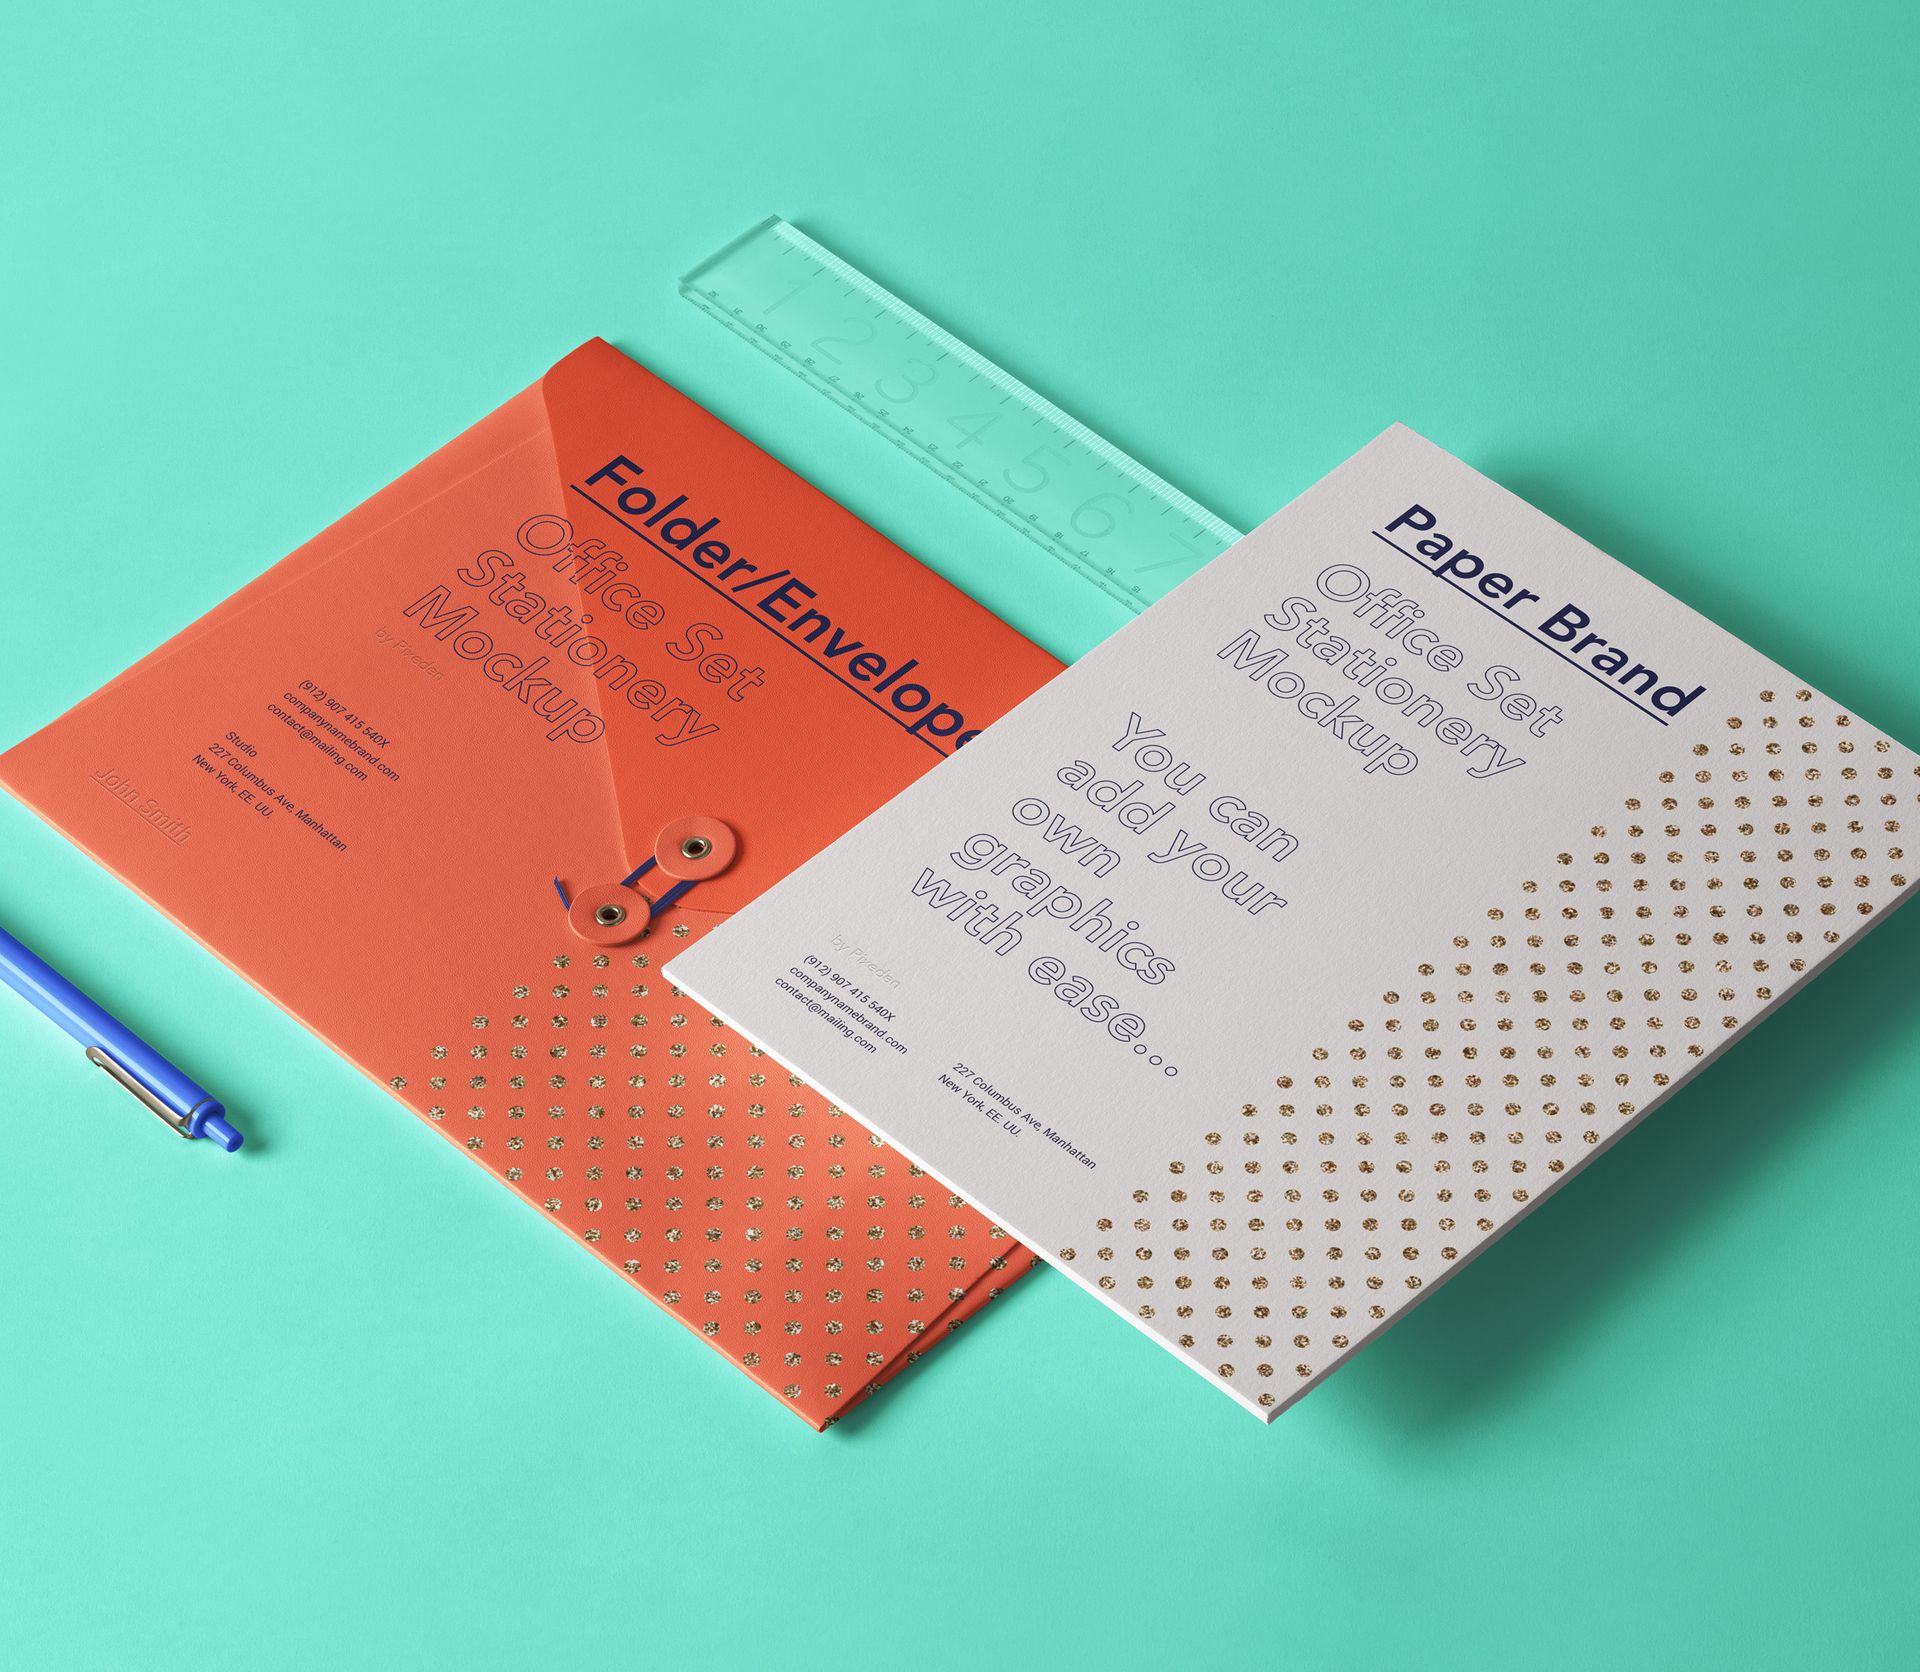 Mockup of a Stationery Office Paper Set Stock Template